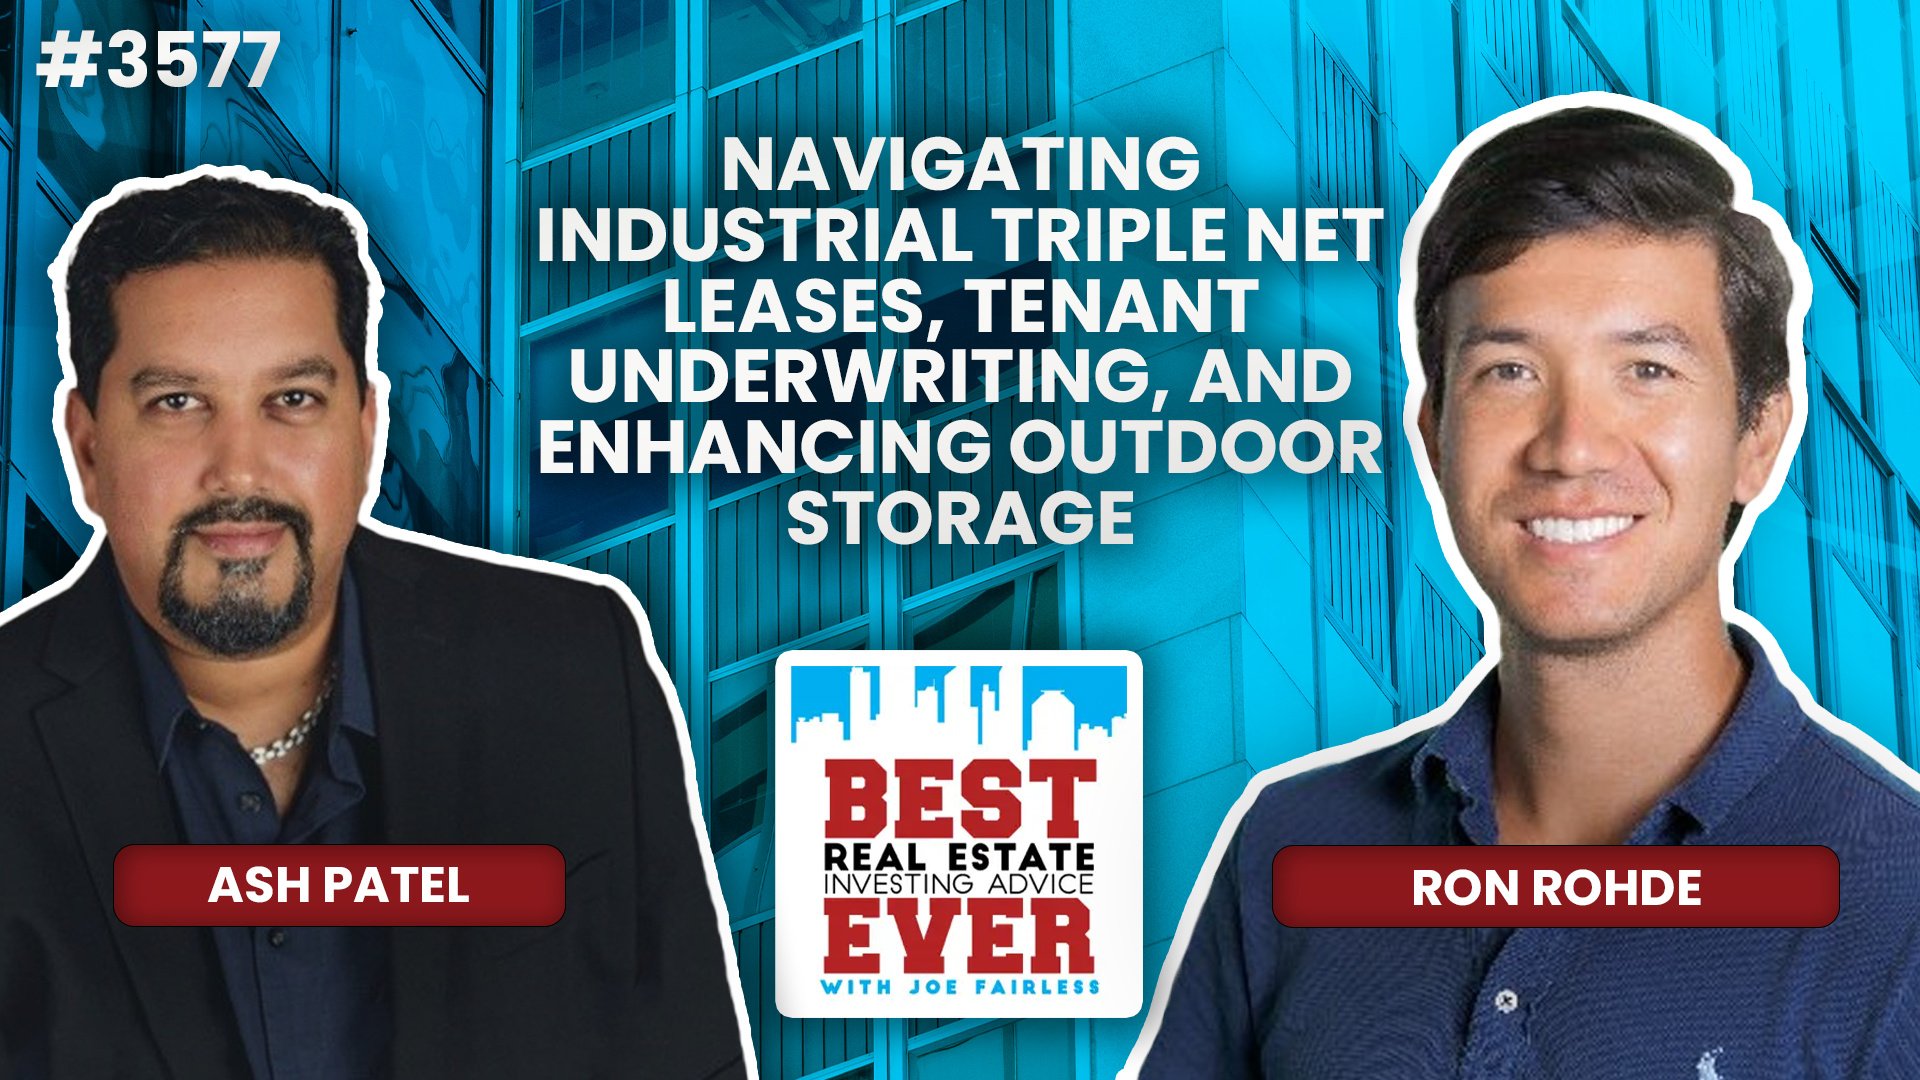 JF3577: Navigating Industrial Triple Net Leases, Tenant Underwriting, and Enhancing Outdoor Storage ft. Ron Rohde